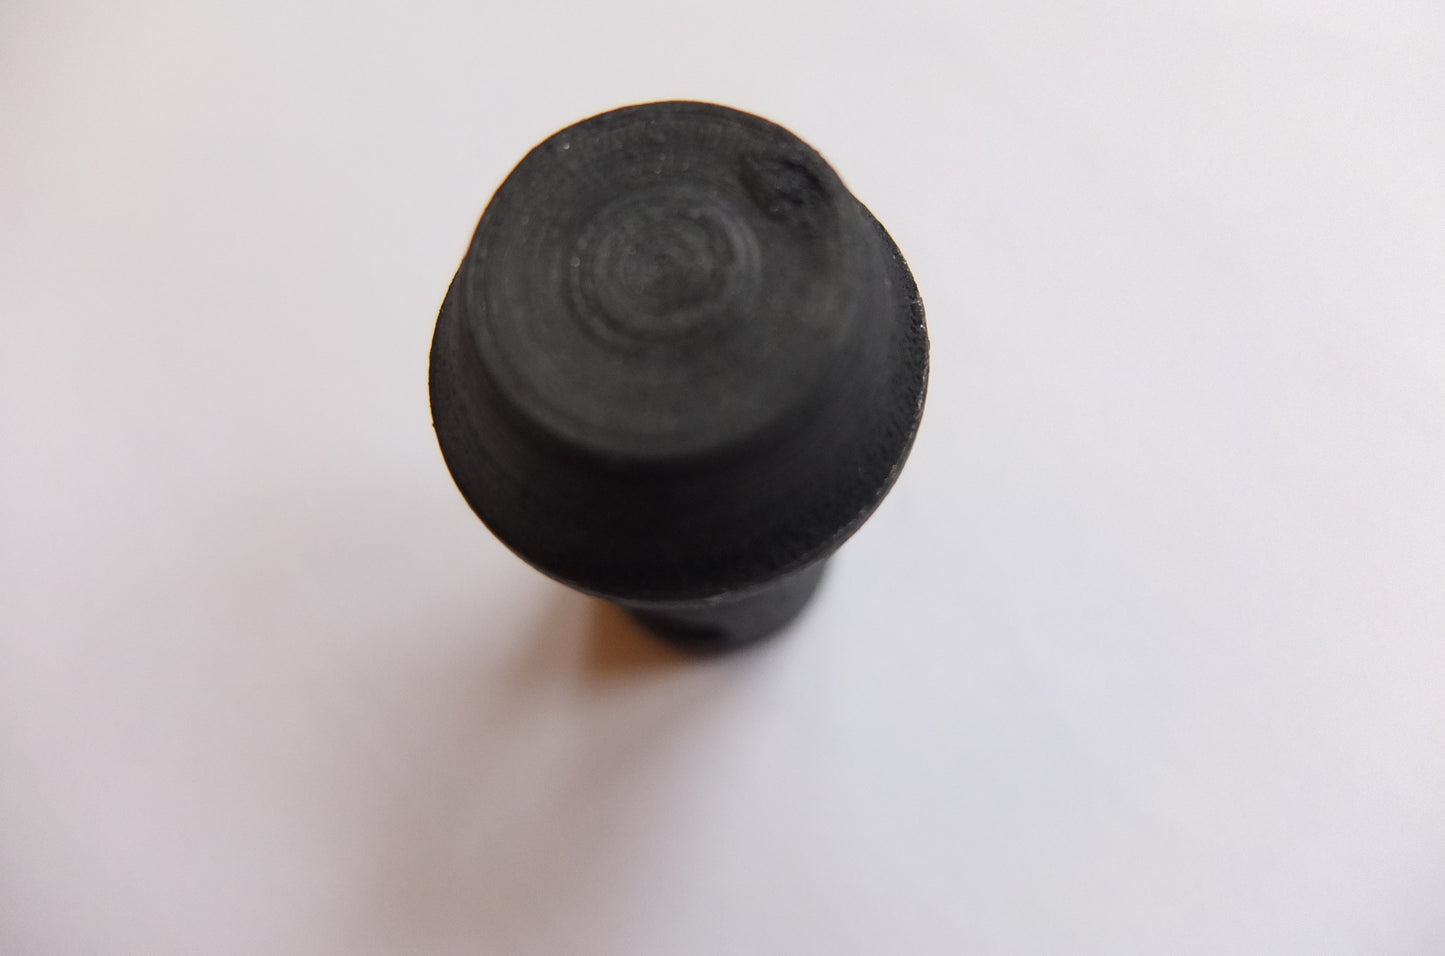 P13/042 Early S7 Snubber 89-4371